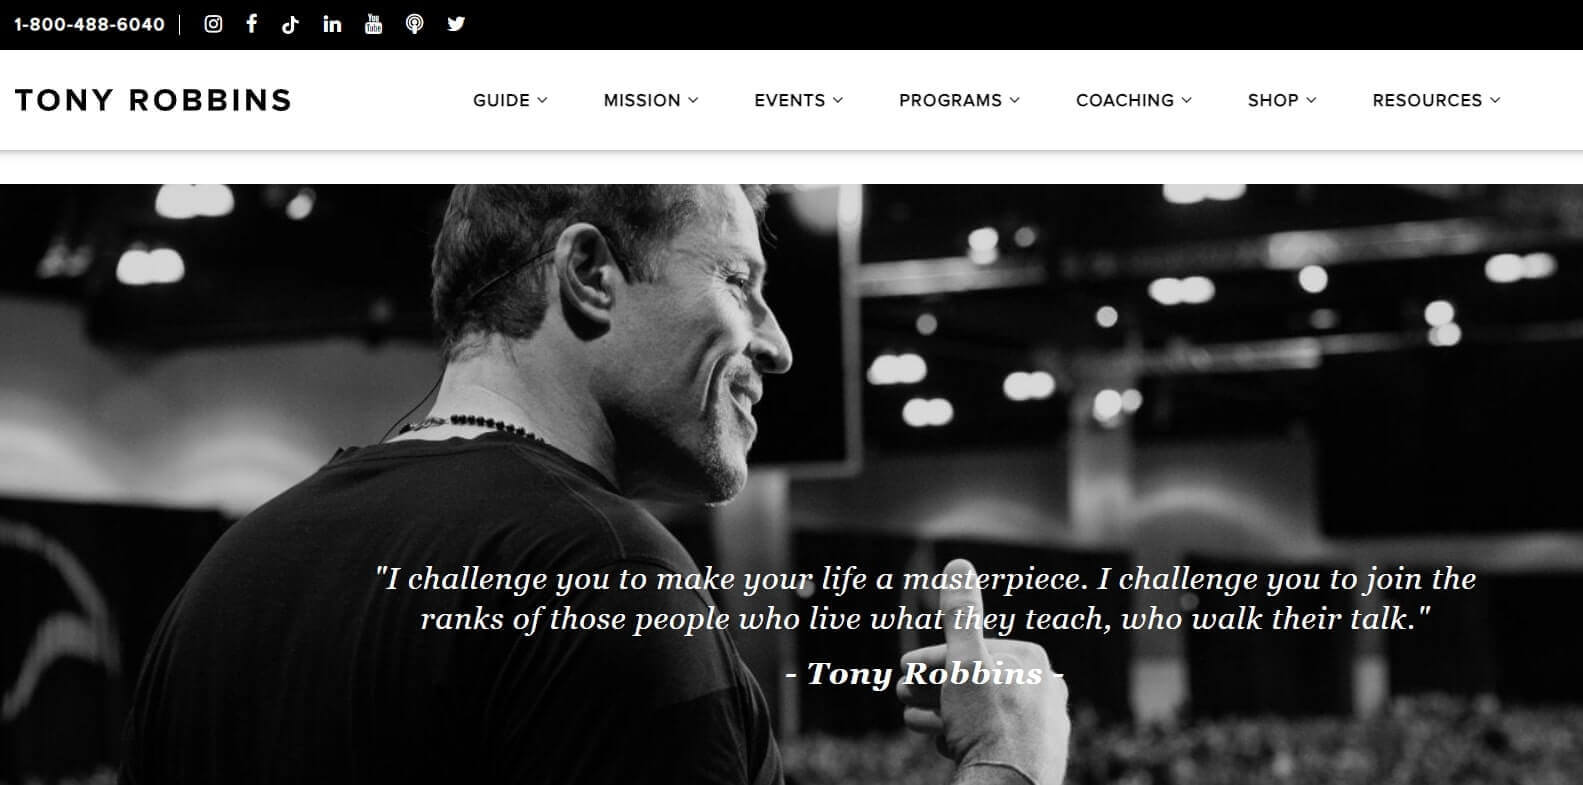 A black and white screenshot of Tony Robbins' website featuring an inspirational quote by him.